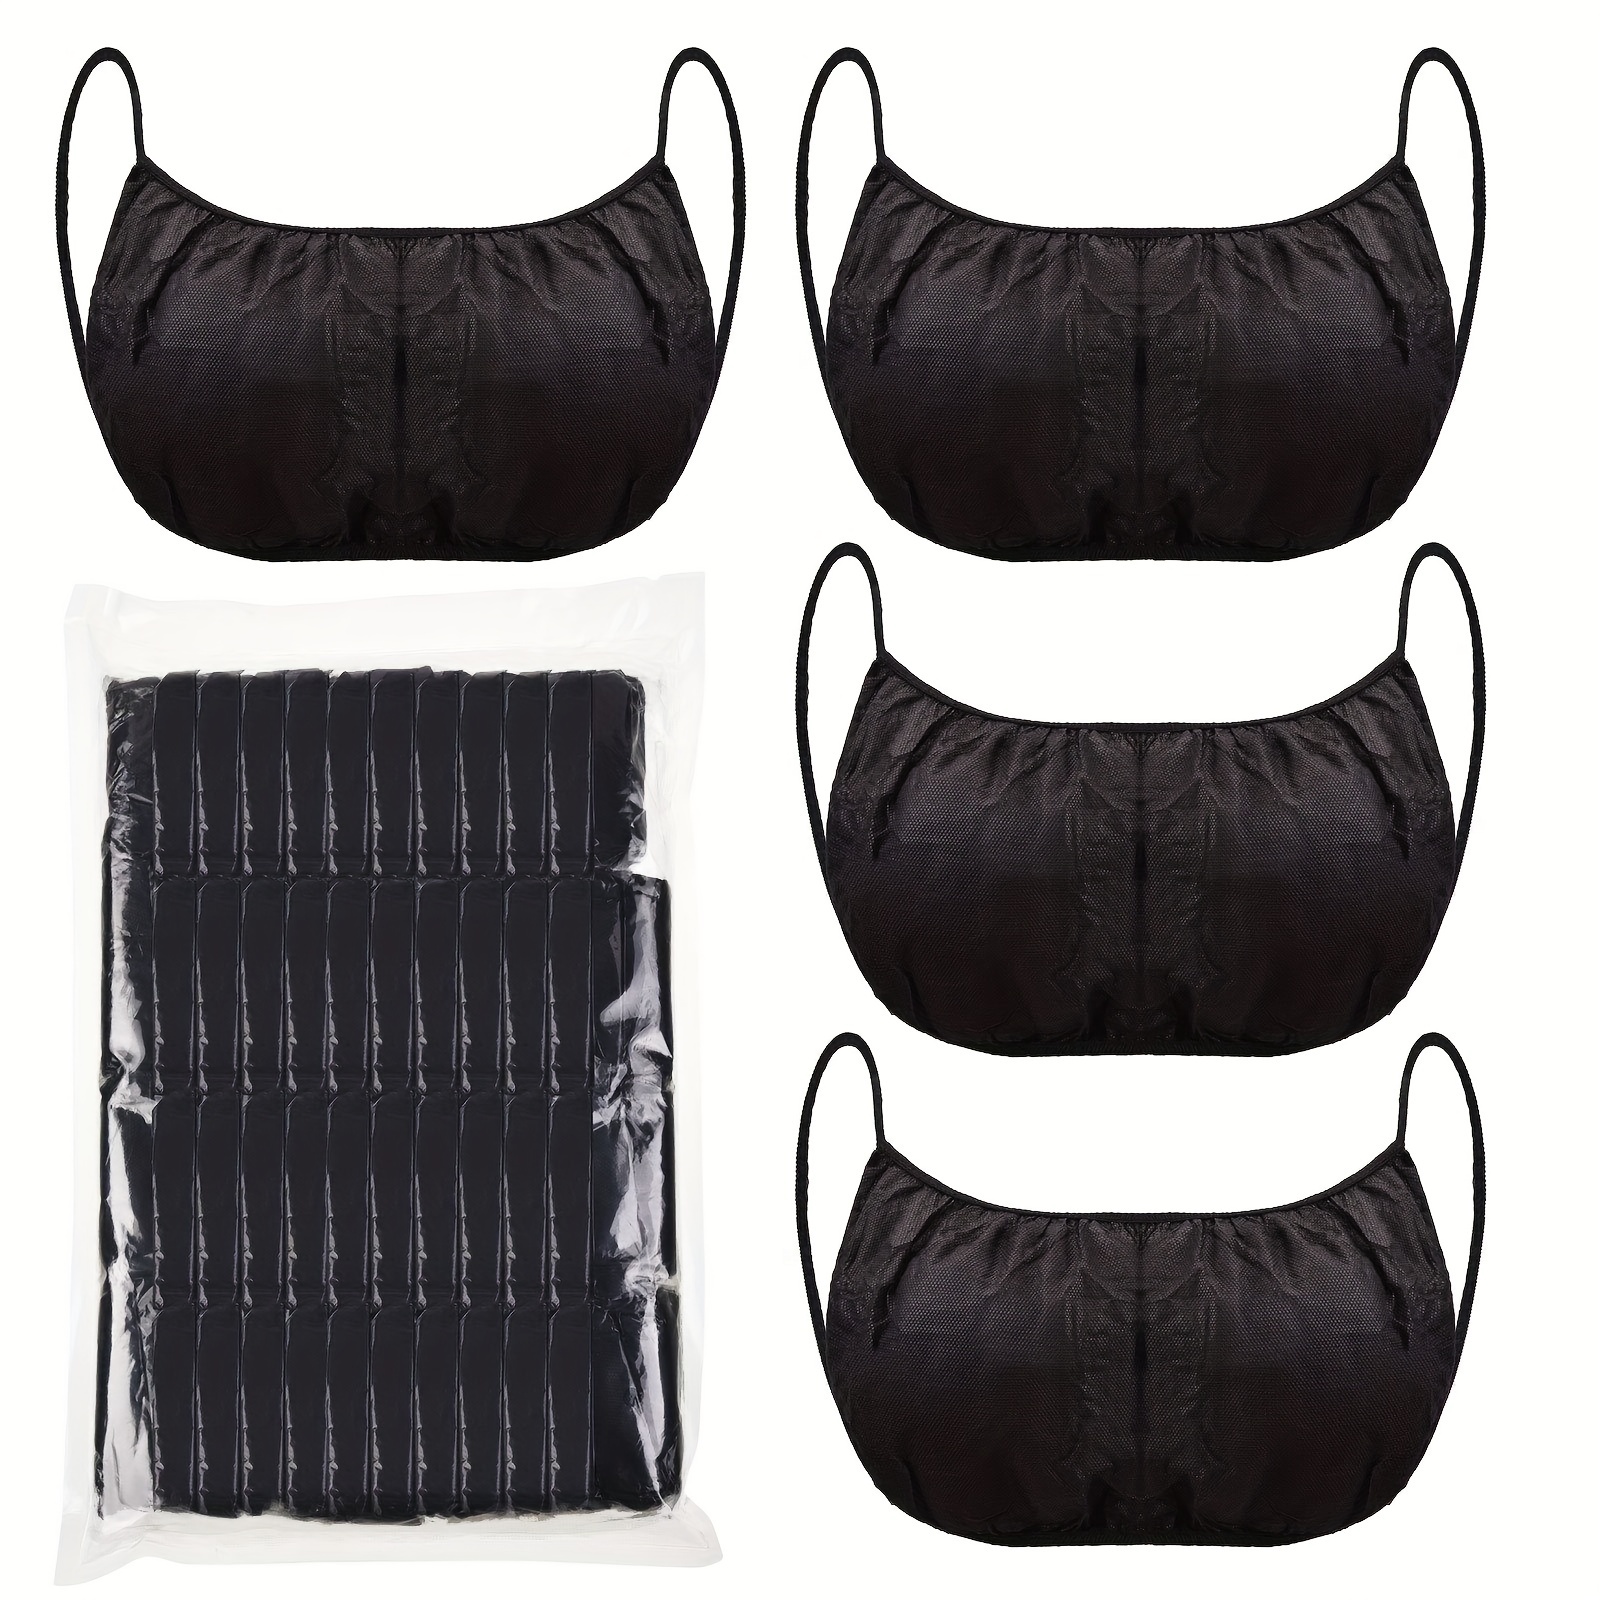 50Pcs Disposable Bras Non Woven Fabric for Sweat Steaming Massage SPA